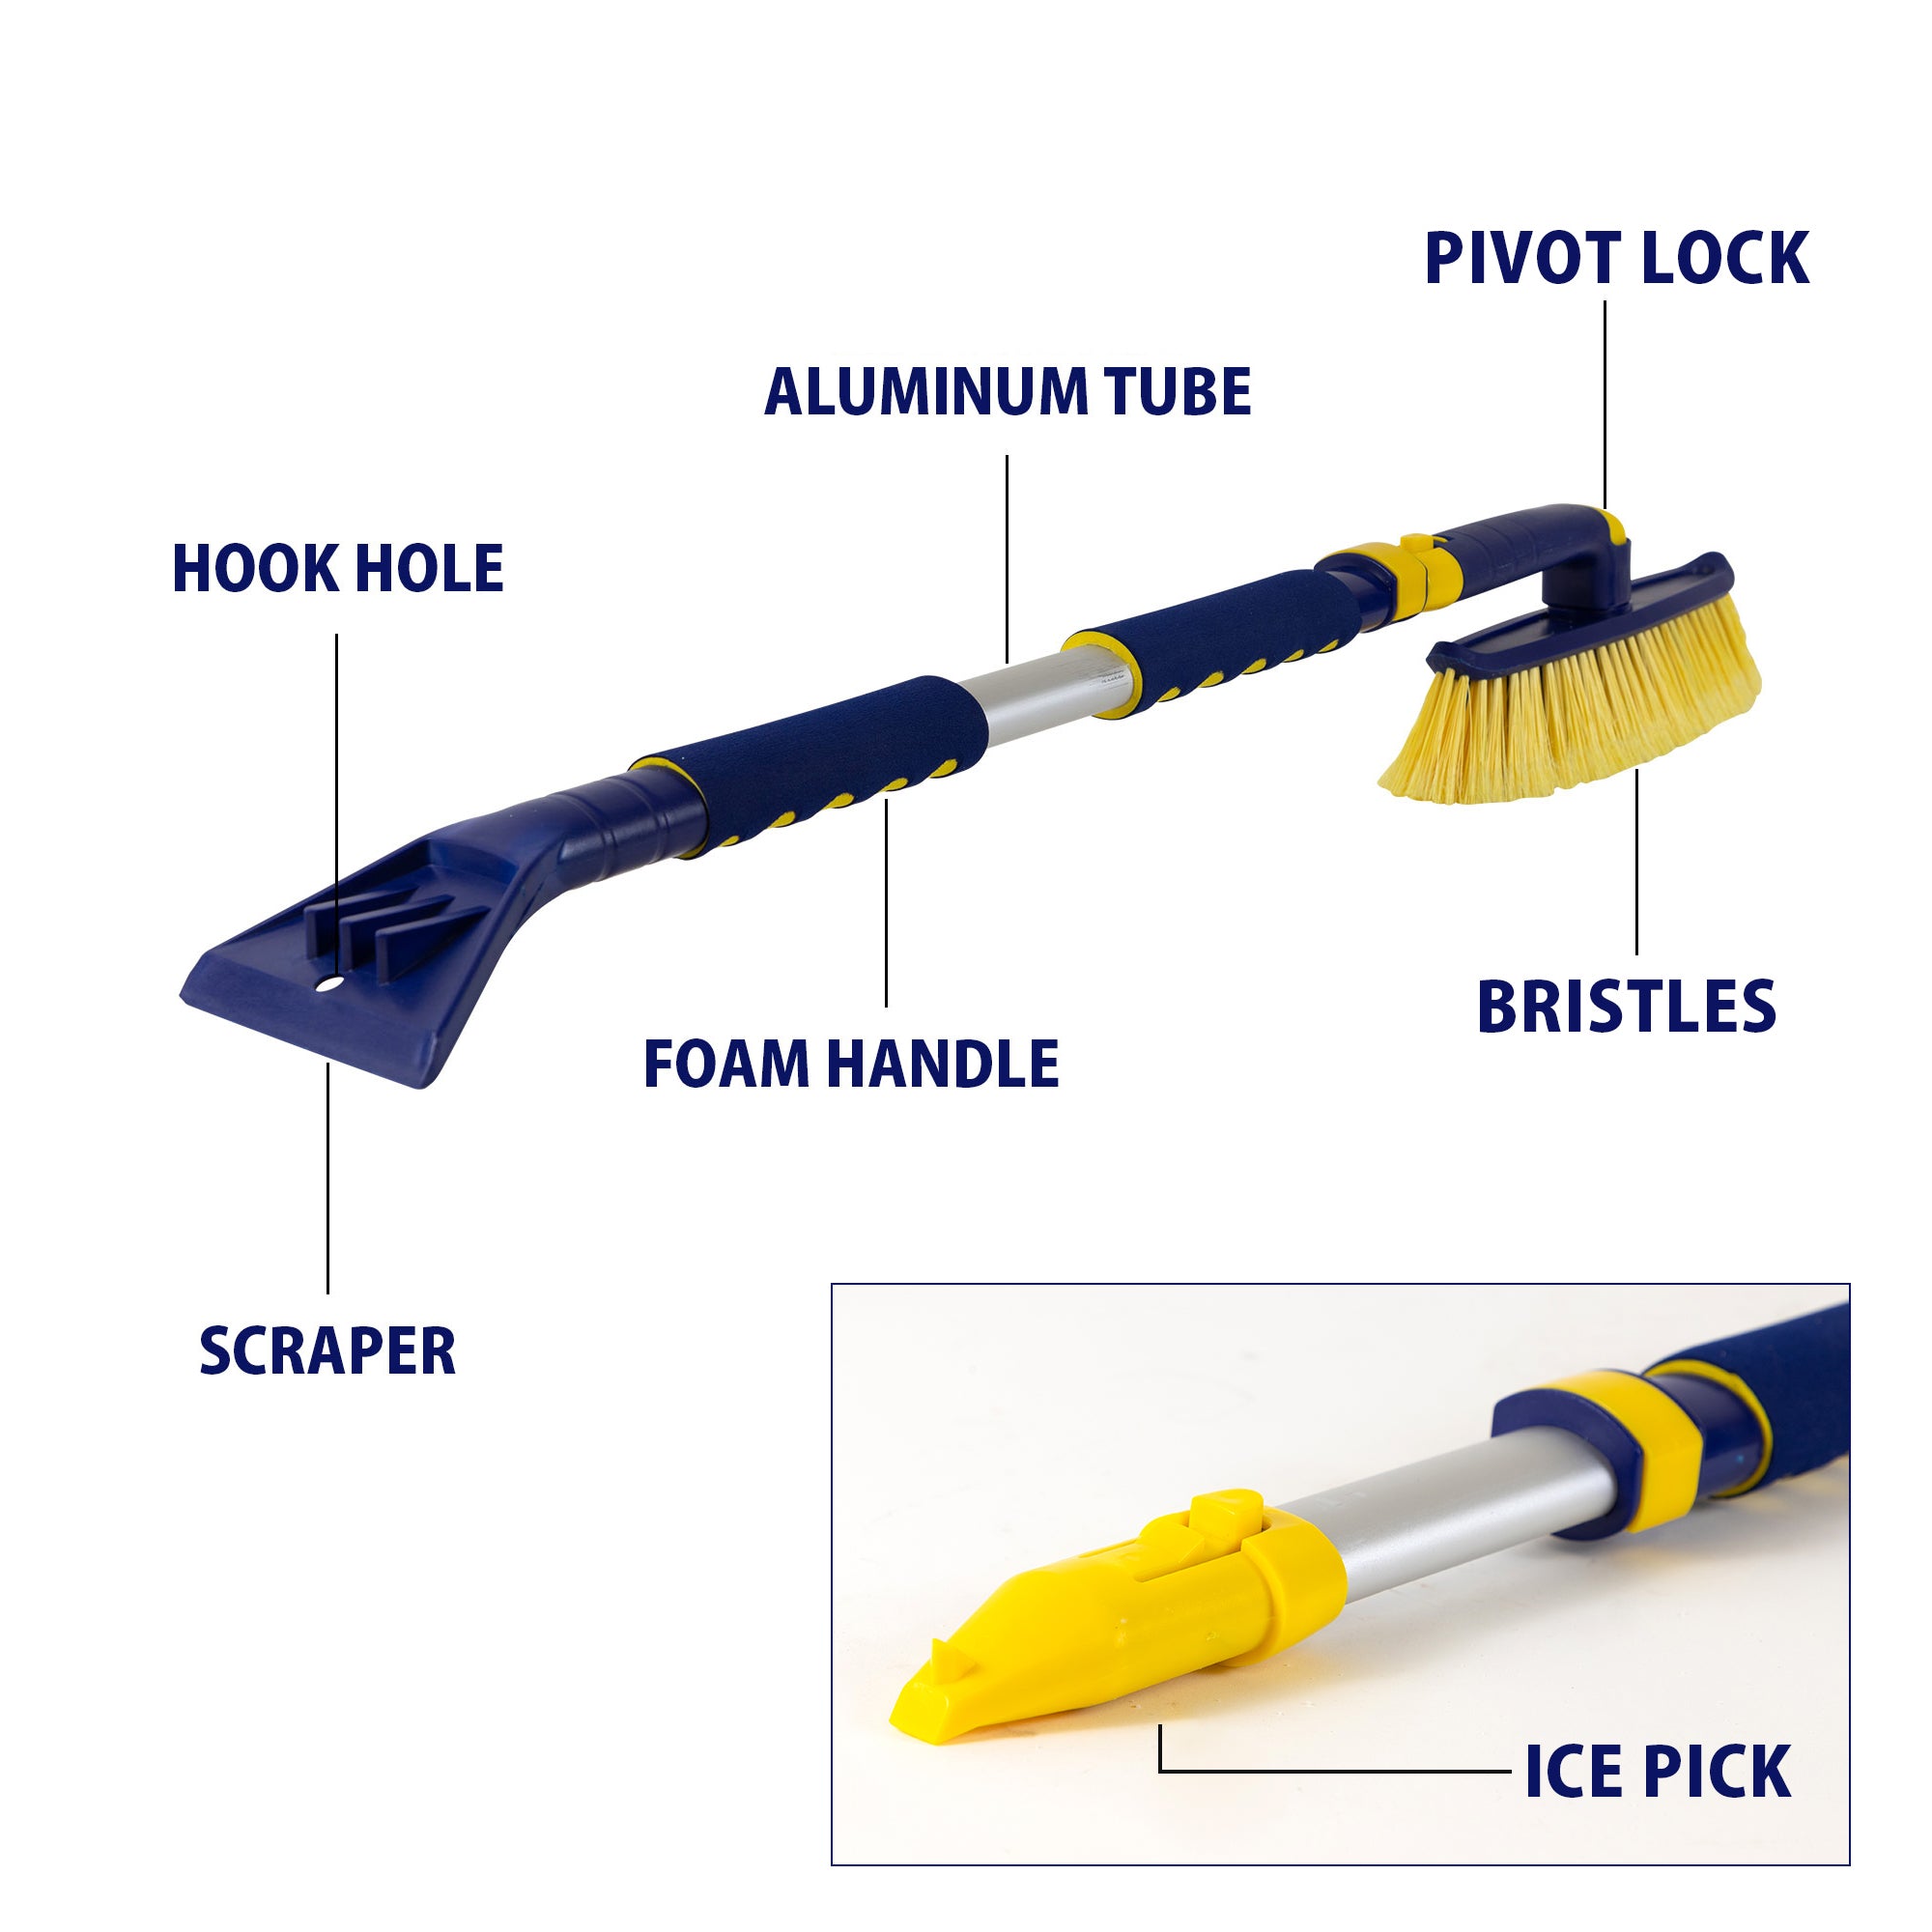 Product shot on white background of snow brush with parts labeled: Pivot lock; bristles; aluminum tube; foam handle; hook hole; scraper. Inset image below shows a closeup of the heavy-duty ice pick, labeled